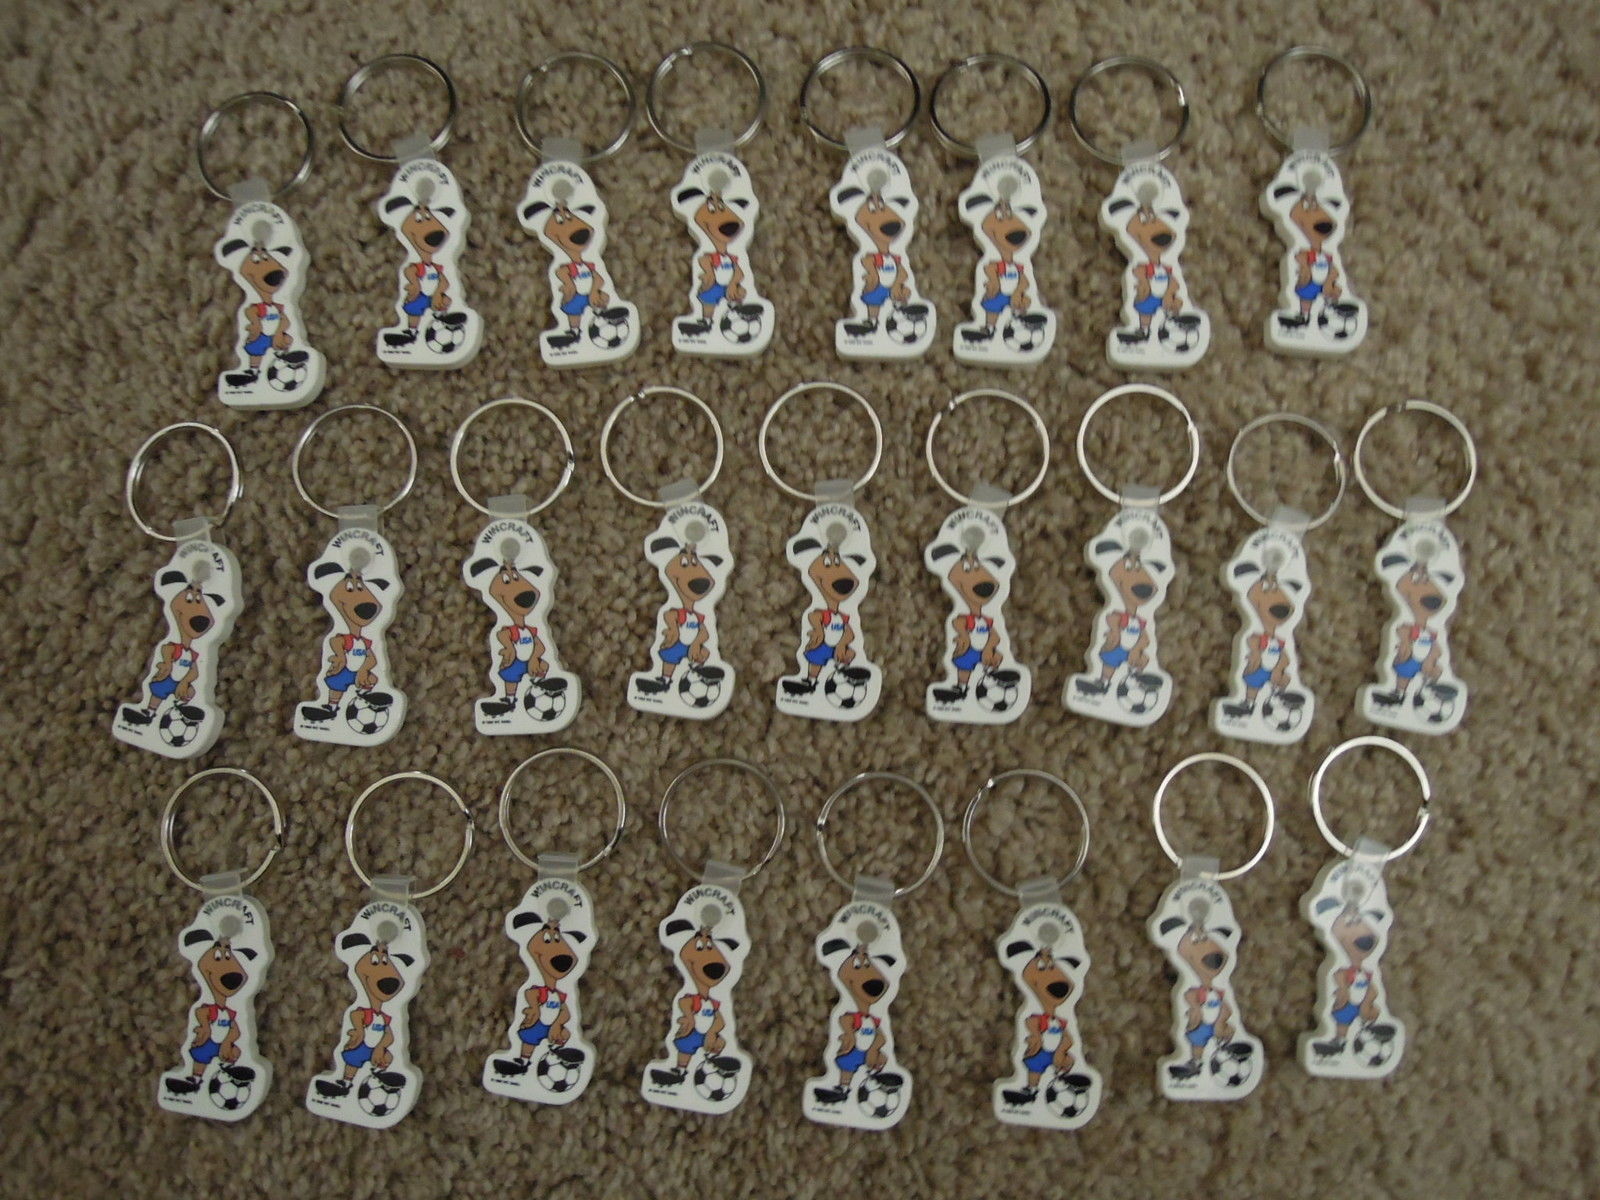 25 PC LOT 1994 World Cup Soccer Rubber Keychains